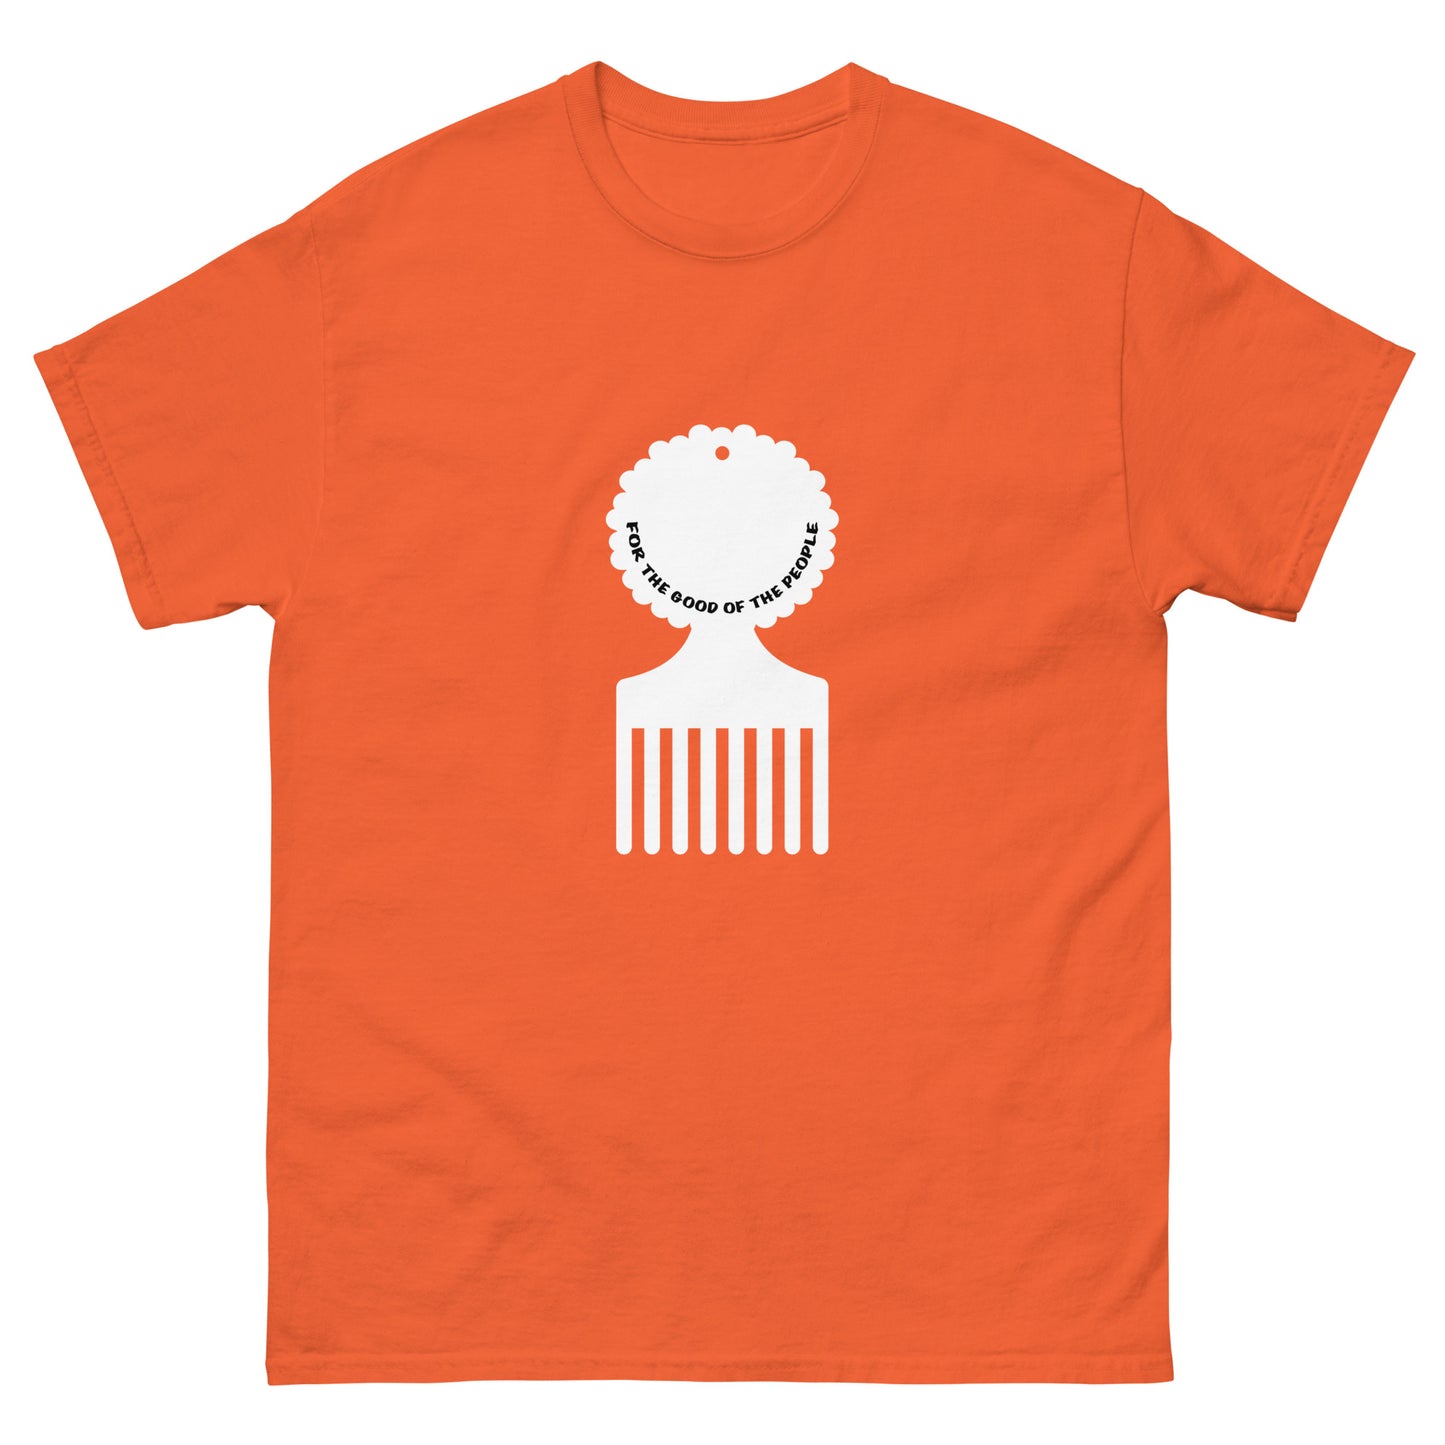 Men's orange tee with white afro pick in the center of shirt, with for the good of the people in white inside the afro pick's handle.